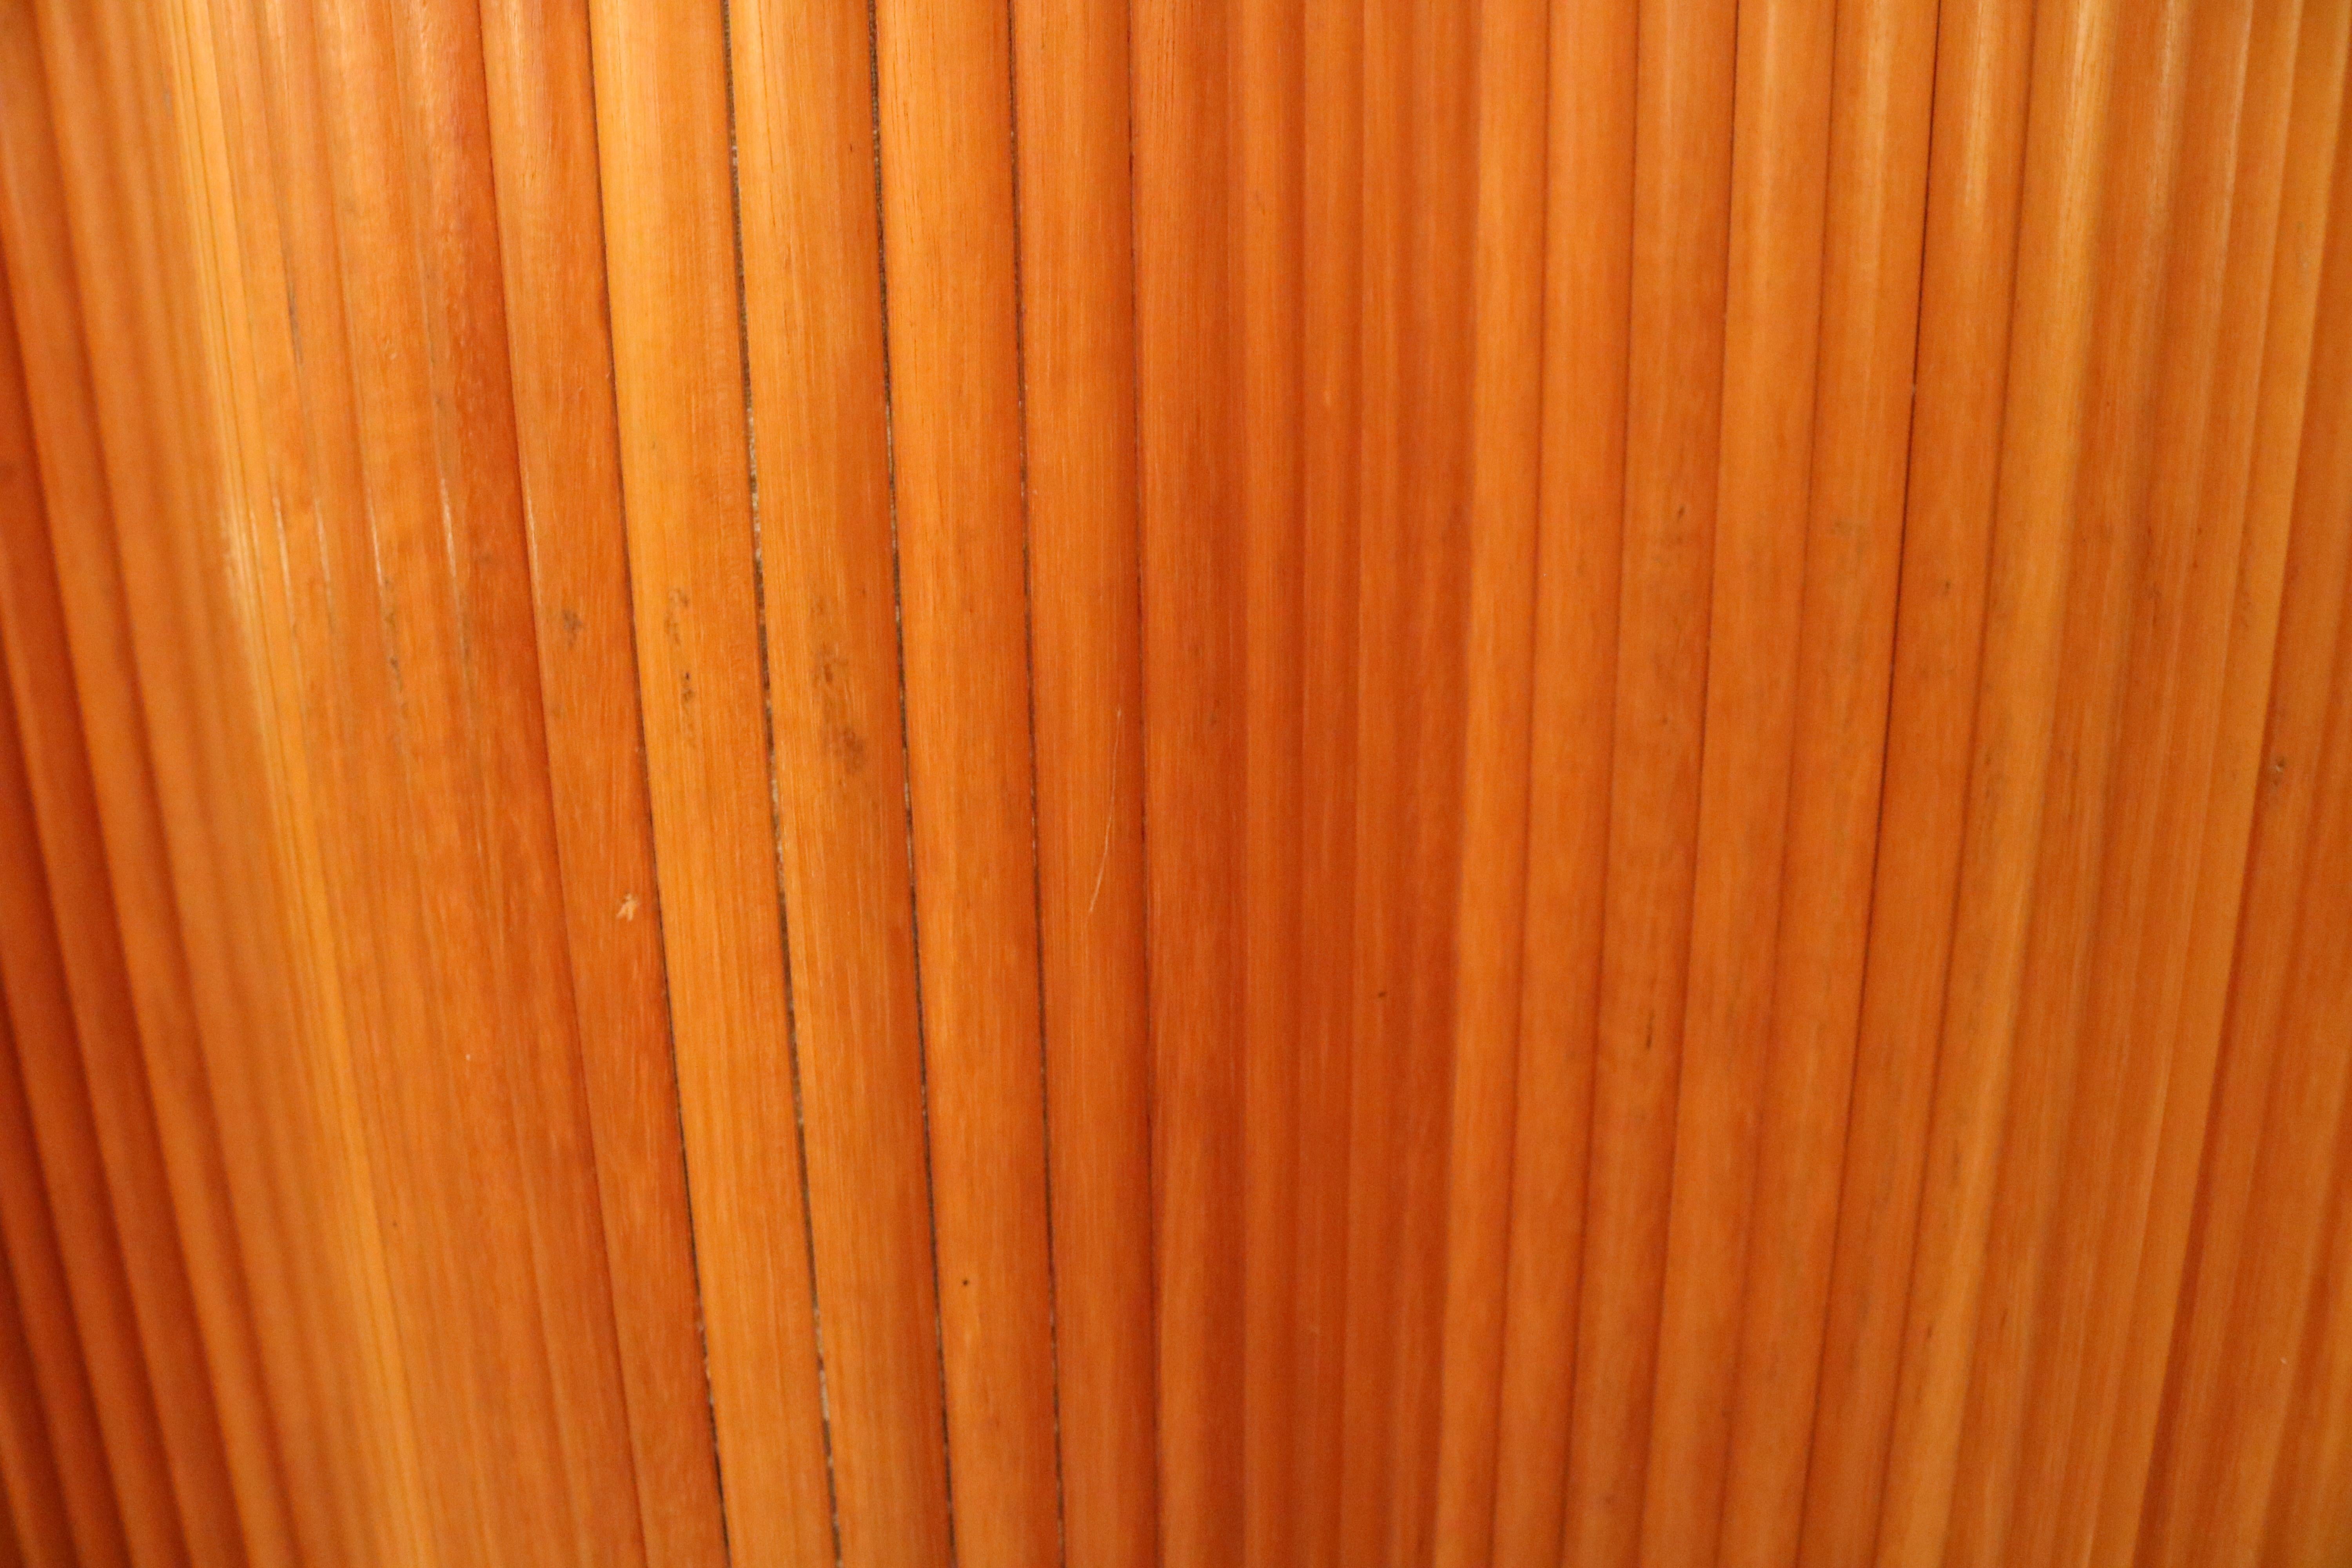 Mid-20th Century Cherrywood Italian Modernist Tambour Screen / Room Divider For Sale